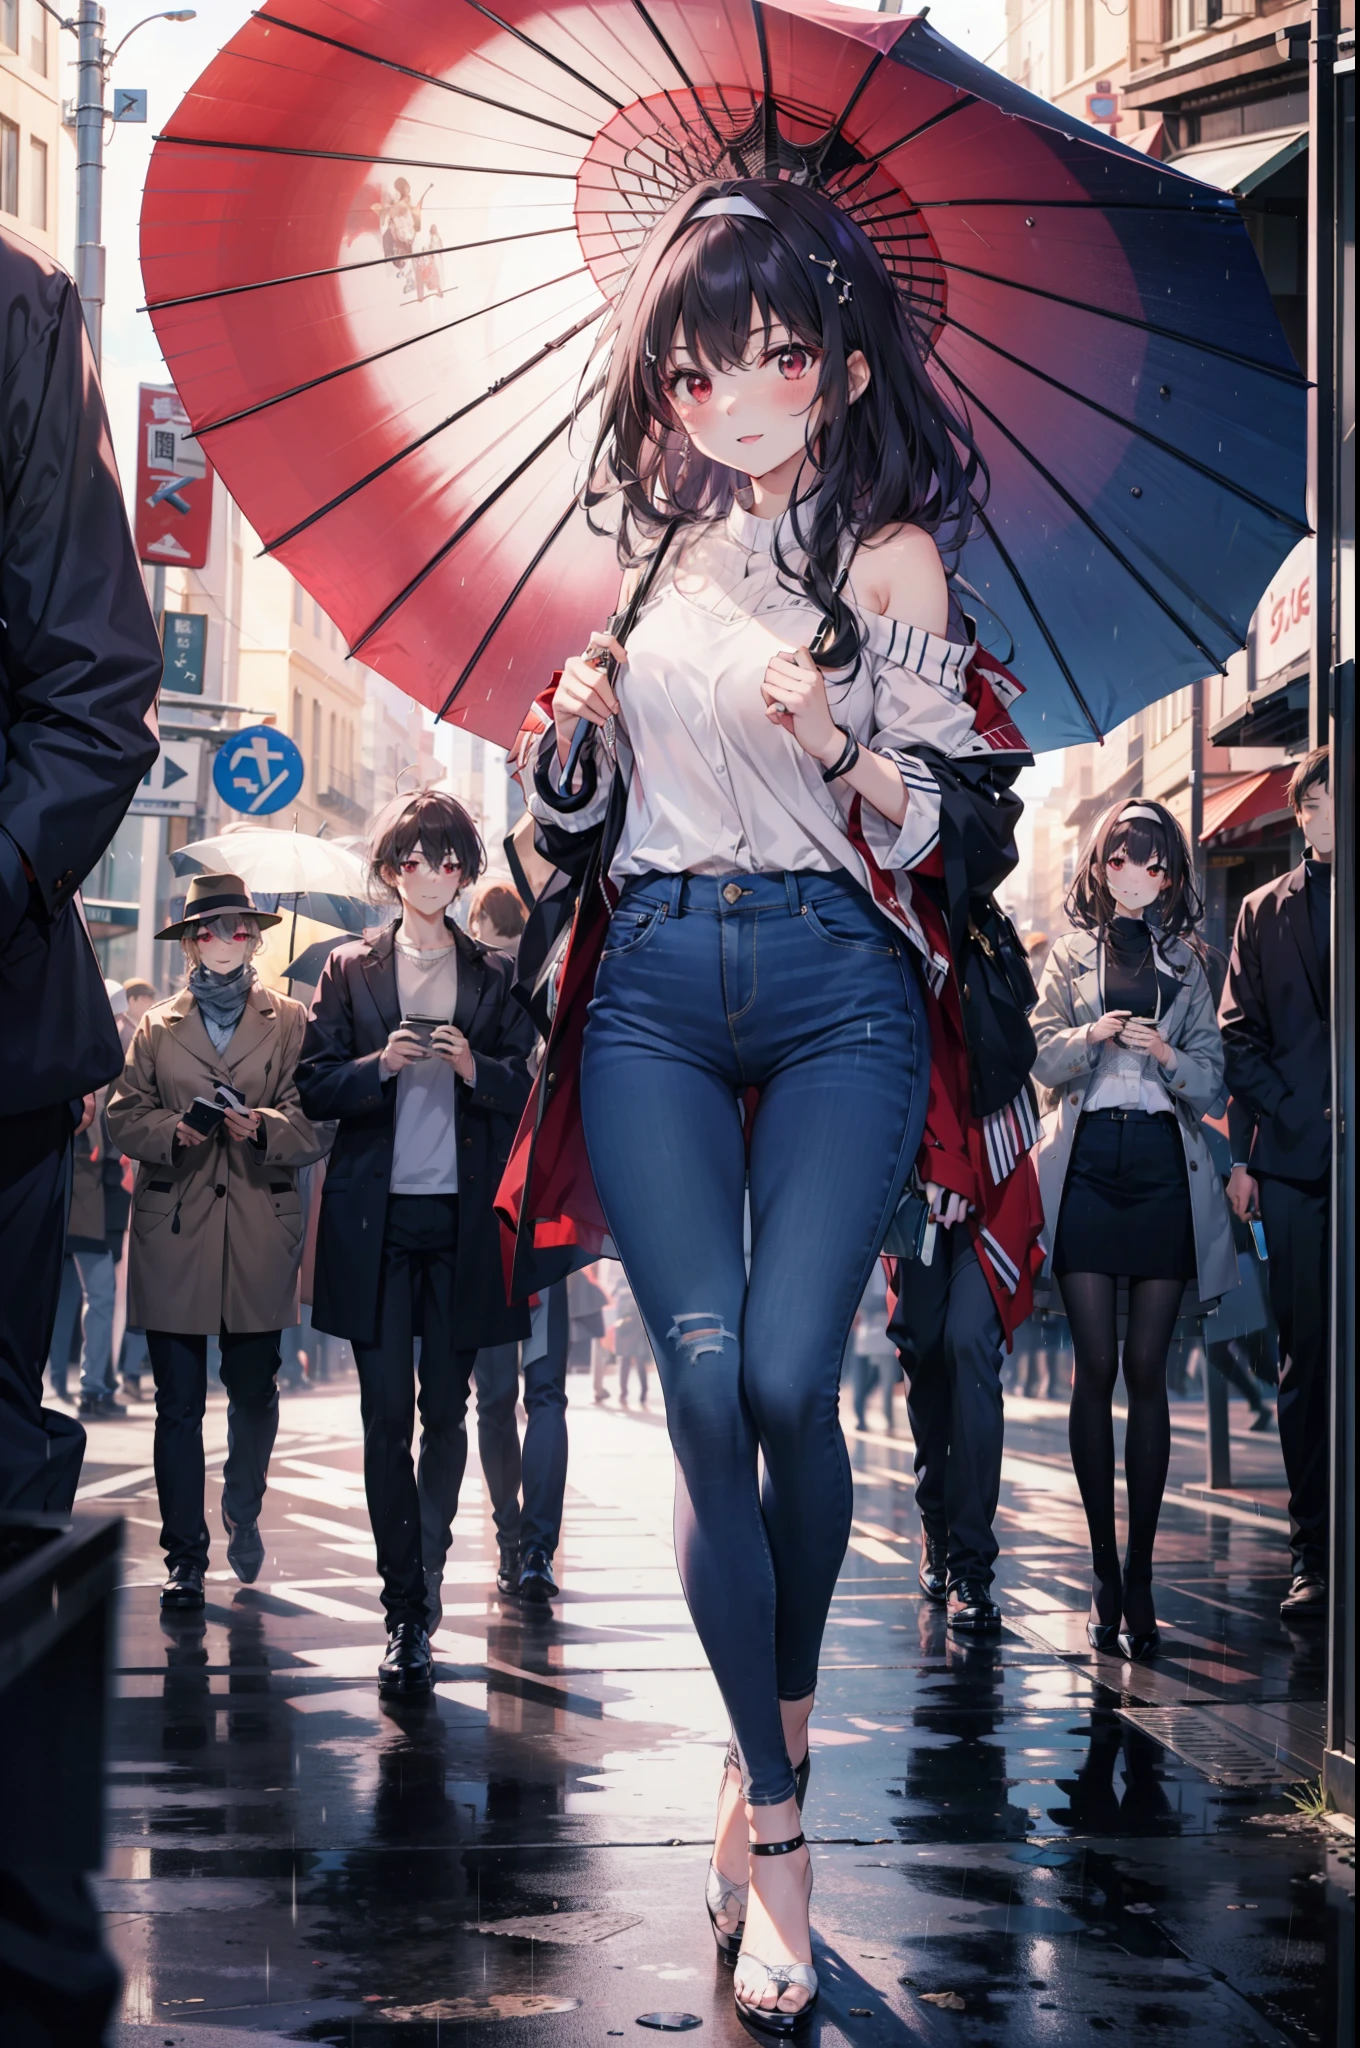 For profit, utaha kasumigaoka, Black Hair, hair band, Long Hair, (Red eyes:1.5), blush,blush,happy smile, smile, Open your mouth,whole bodyがイラストに入るように,Looking down from above,　One-Shoulder Tops,Skinny jeans,Stiletto heels,walking,Cloudy,rain,umbrella,umbrellaのグリップを持っている,whole bodyがイラストに入るように,
break looking at viewer,whole body,
break outdoors, Building district,
break (masterpiece:1.2), highest quality, High resolution, unity 8k wallpaper, (figure:0.8), (Beautiful fine details:1.6), Highly detailed face, Perfect lighting, Highly detailed CG, (Perfect hands, Perfect Anatomy),